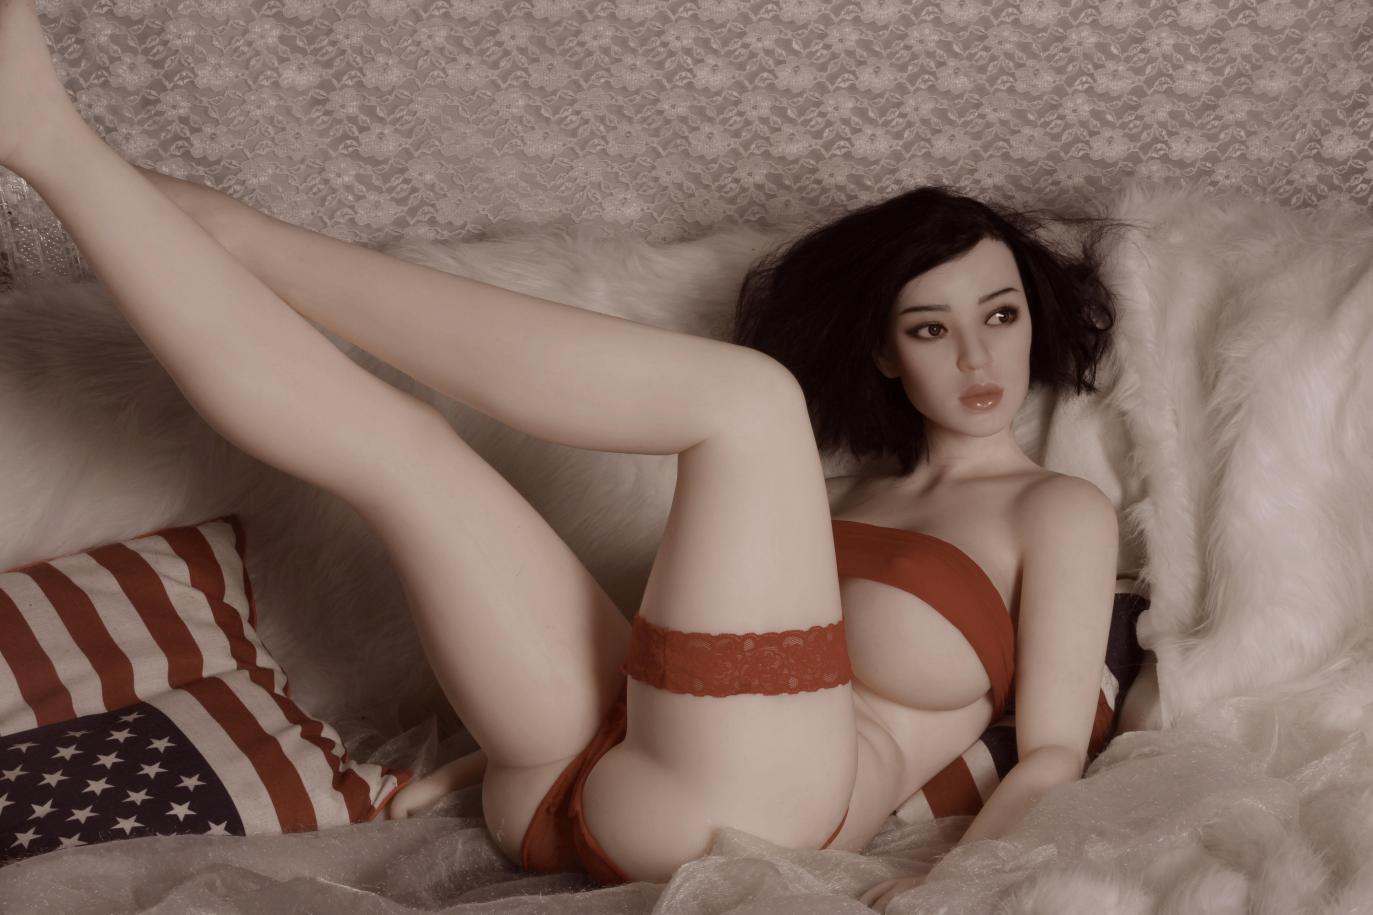 My experience of falling in love with a sex doll header image shows a full size, dark haired sex doll reclining on a bed, wearing red lingerie.